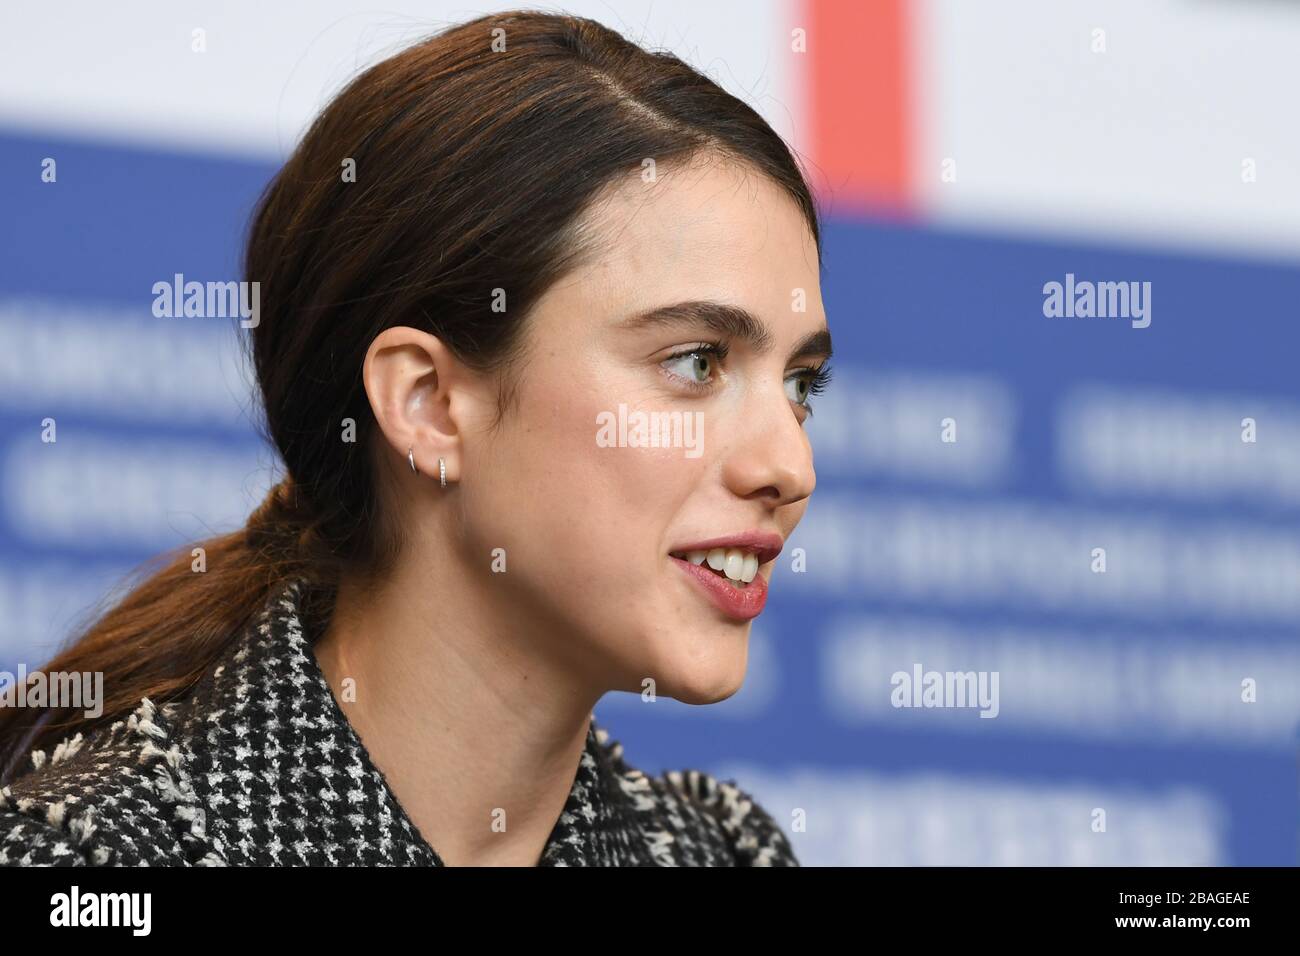 Margaret Qualley attends the press conference for My Salinger Year during the 70th Berlin Film Festival at the Grand Hyatt Berlin. © Paul Treadway Stock Photo